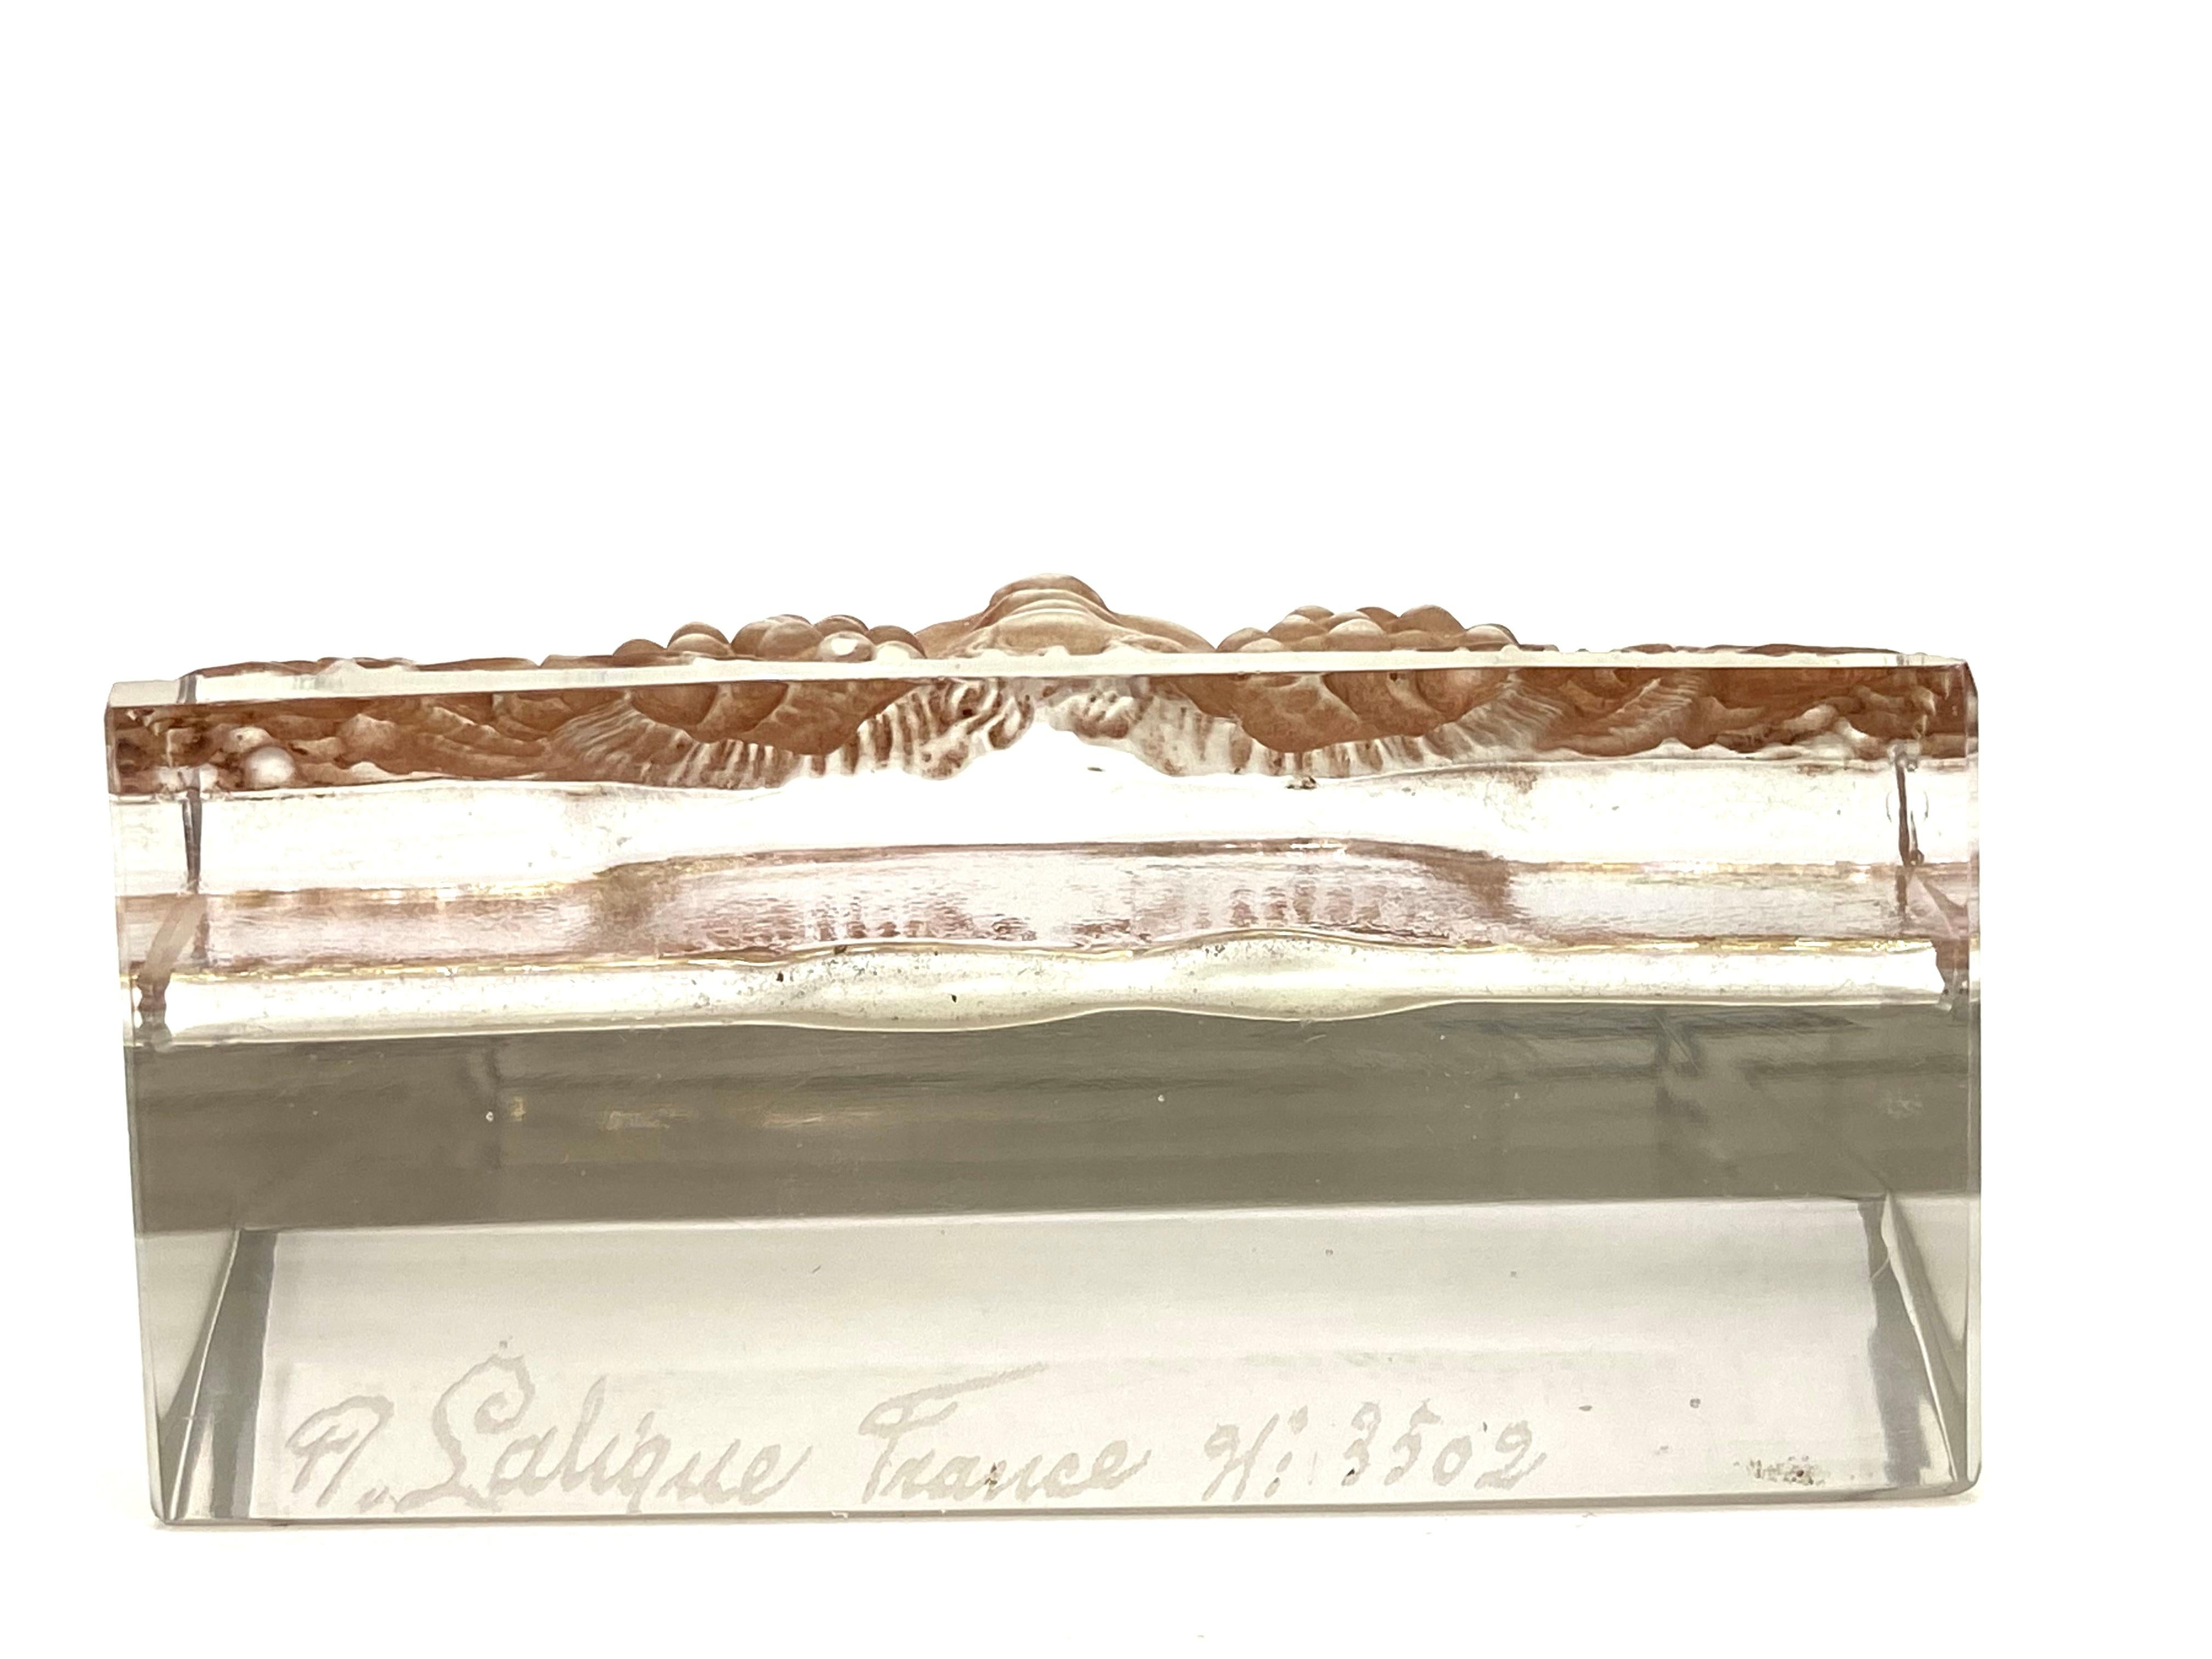 Molded 1928 René Lalique Faune Menu Holder Clear Glass with Sepia Patina